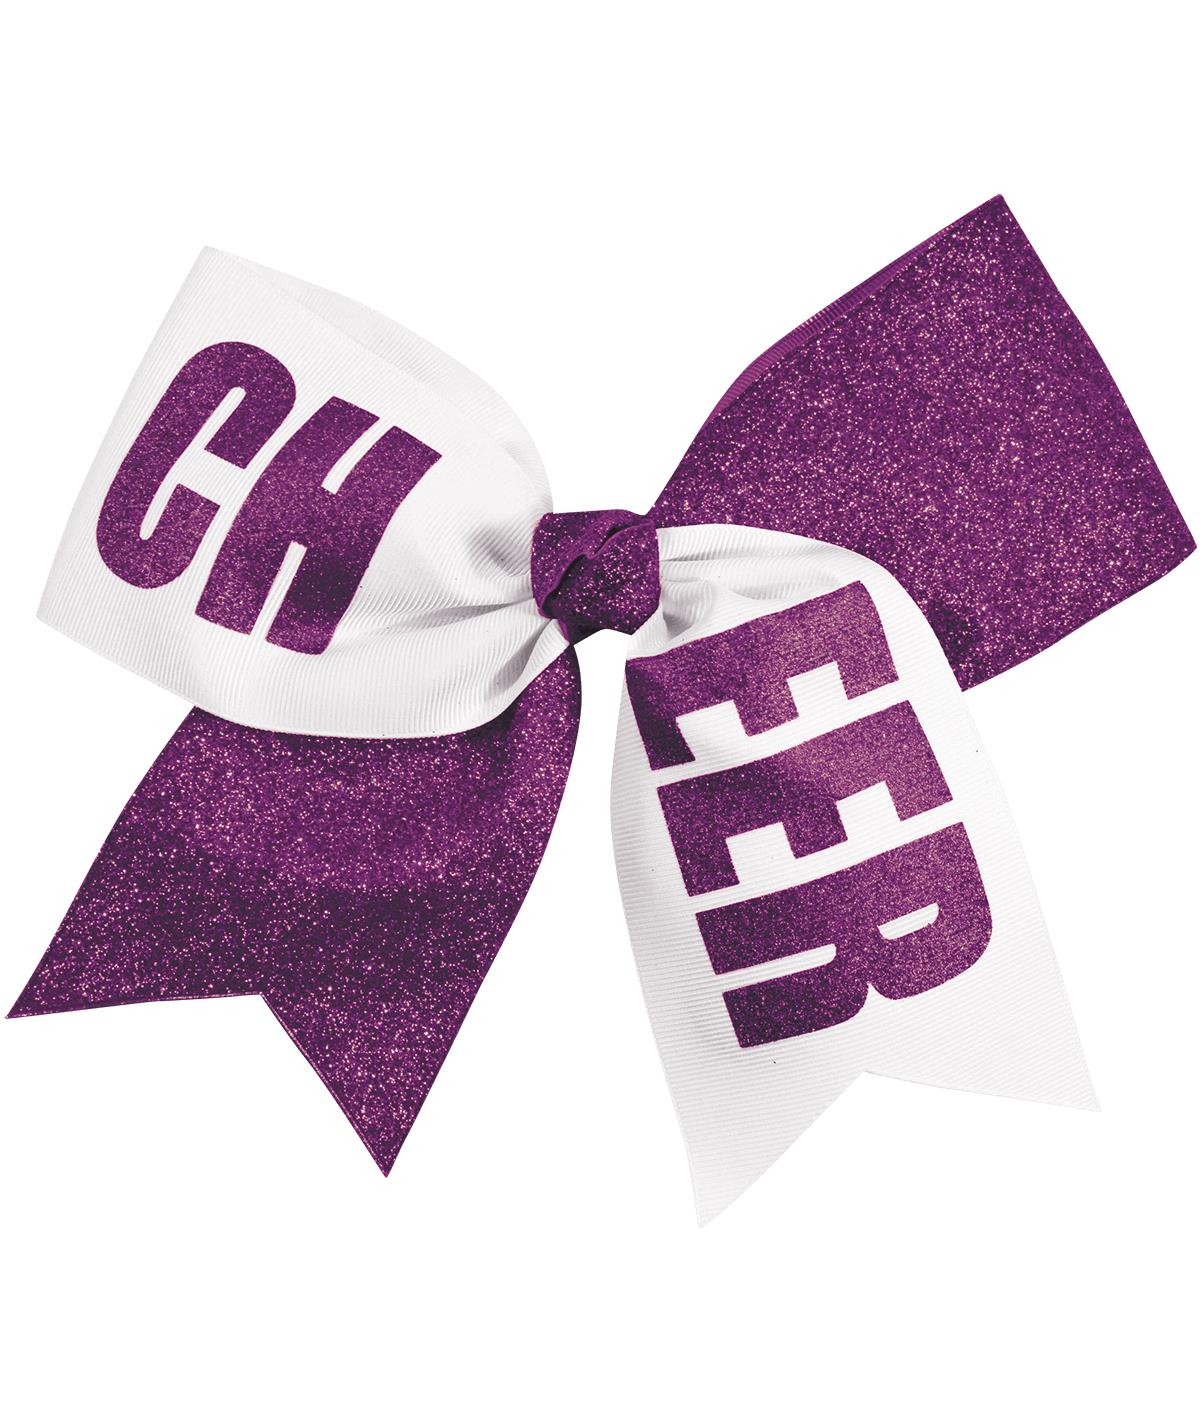 Chasse Cheer Performance Hair Bow - Cheer Bows